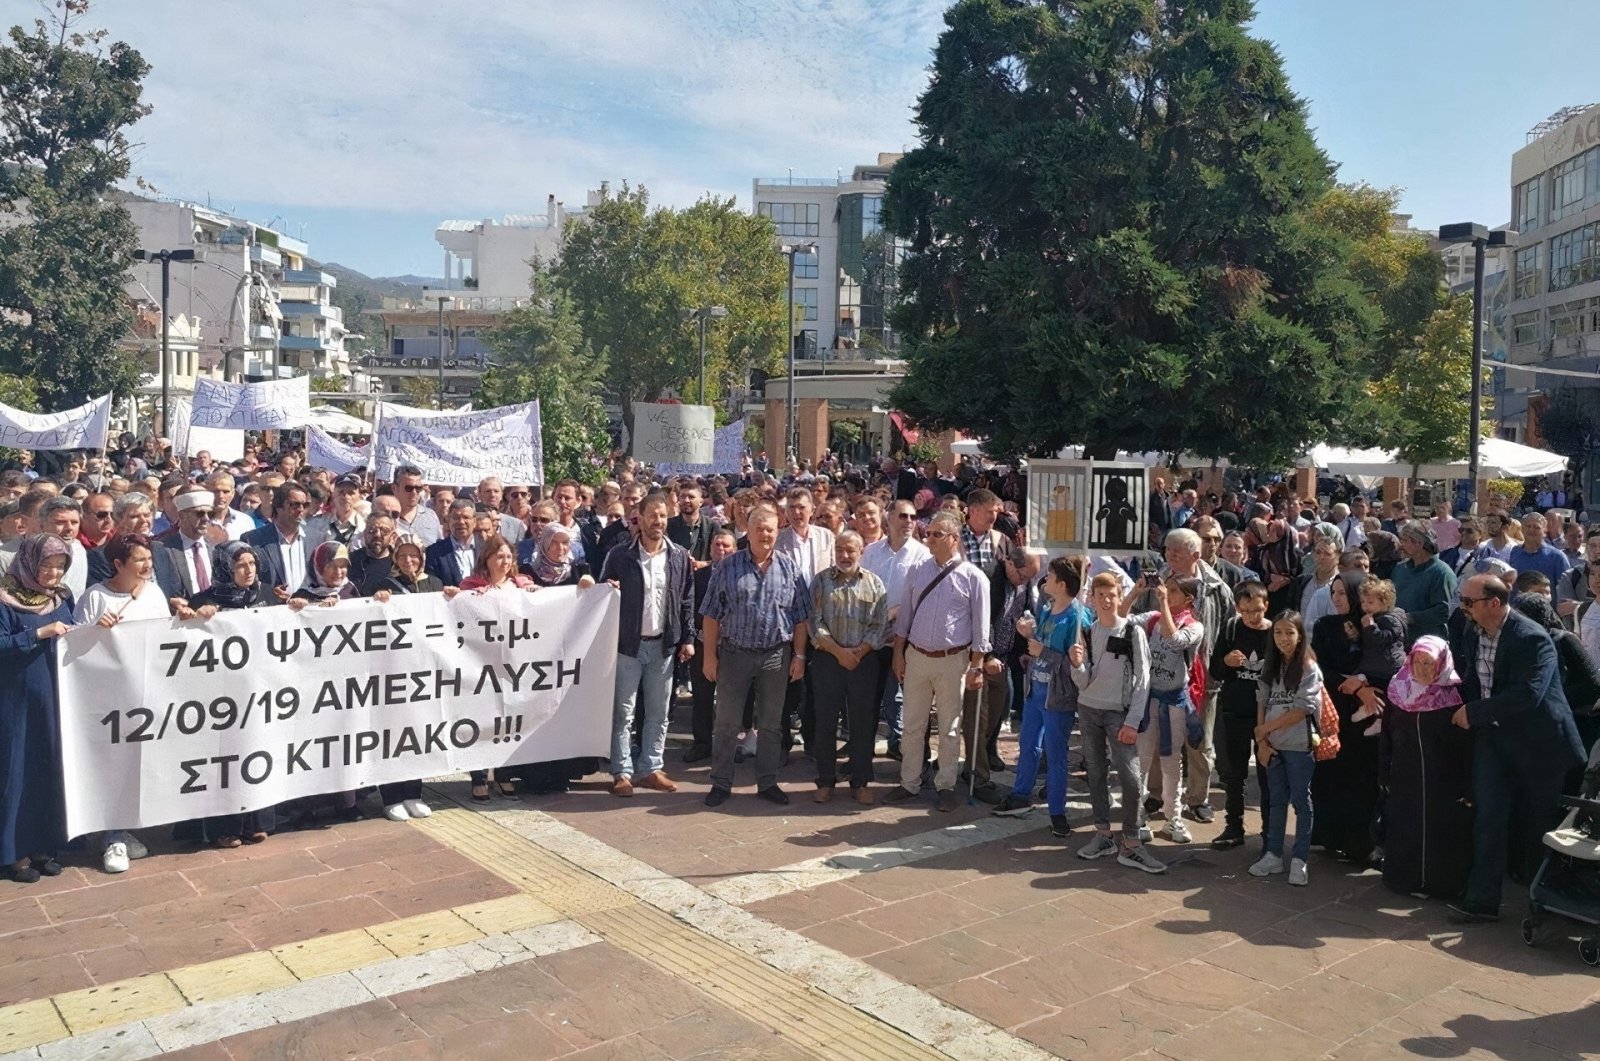 Turks in Western Thrace's Iskeçe (Xanthi) province protest Greek government's assimilation policies in education, Iskeçe (Xanthi), Western Thrace, Greece, Sept. 24, 2019. (Sabah Photo)